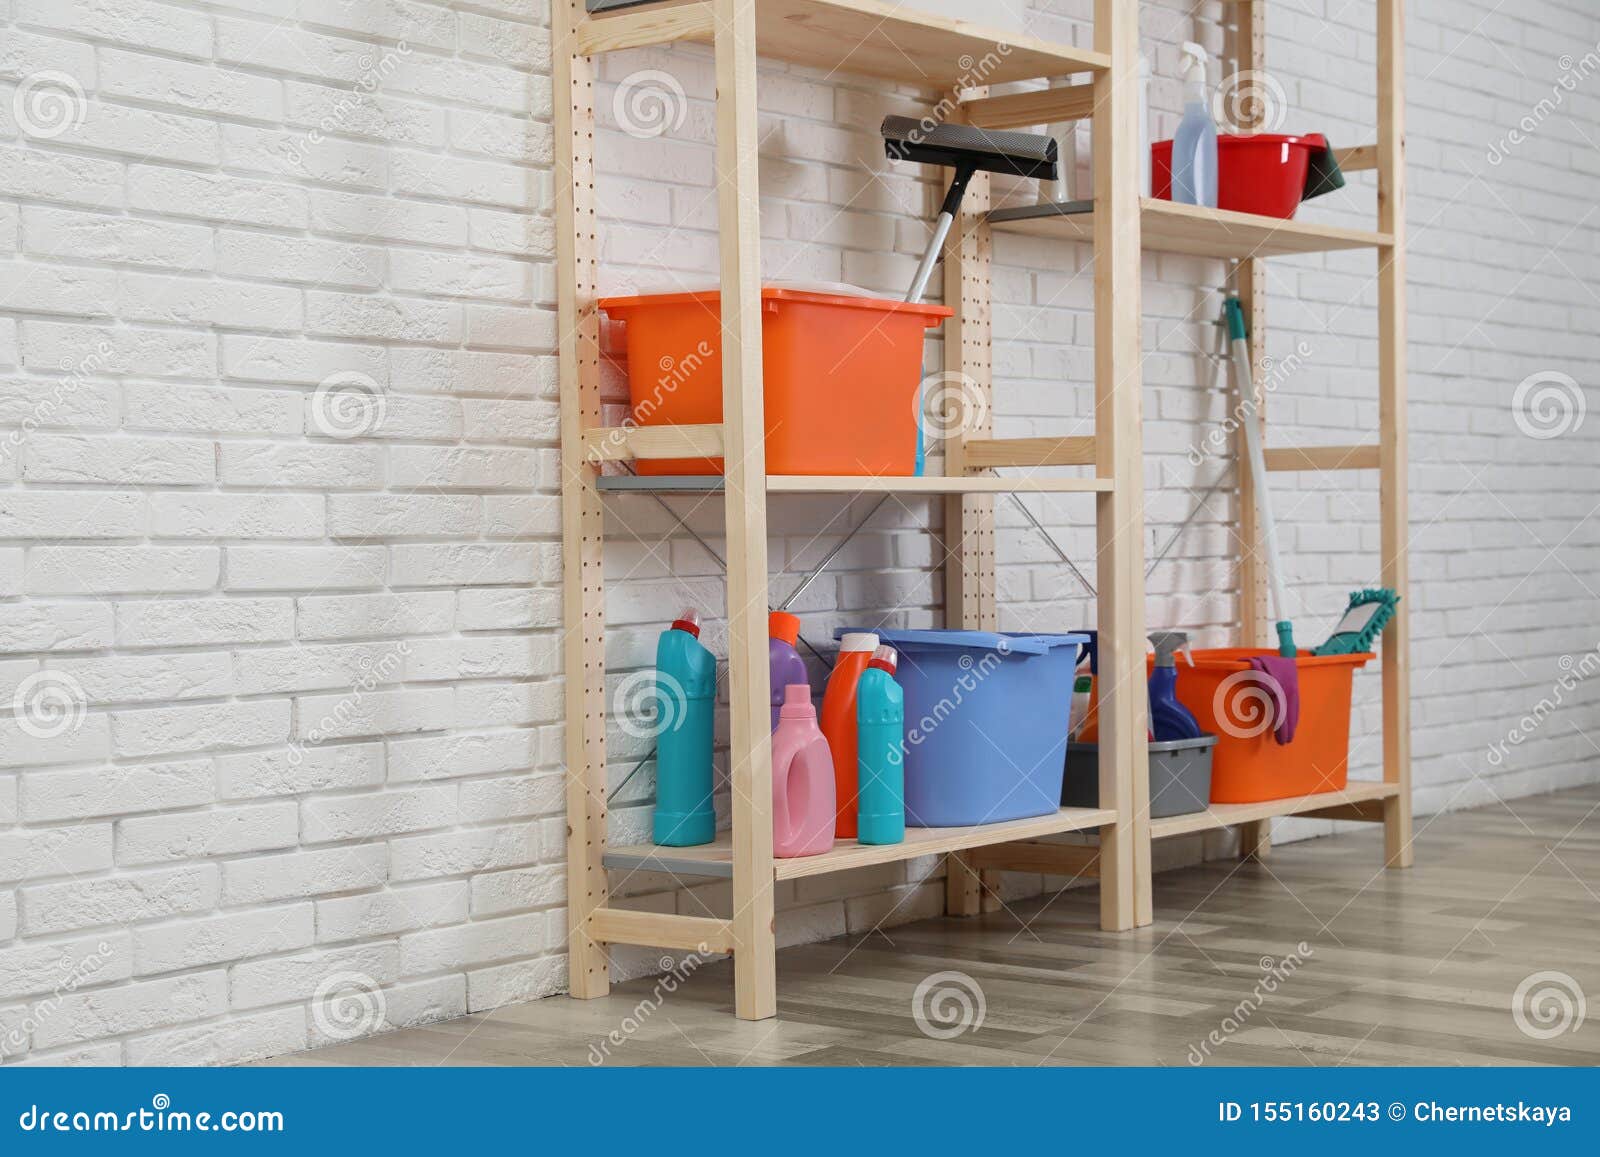 Wooden Shelving Units With Cleaning Equipment Near White